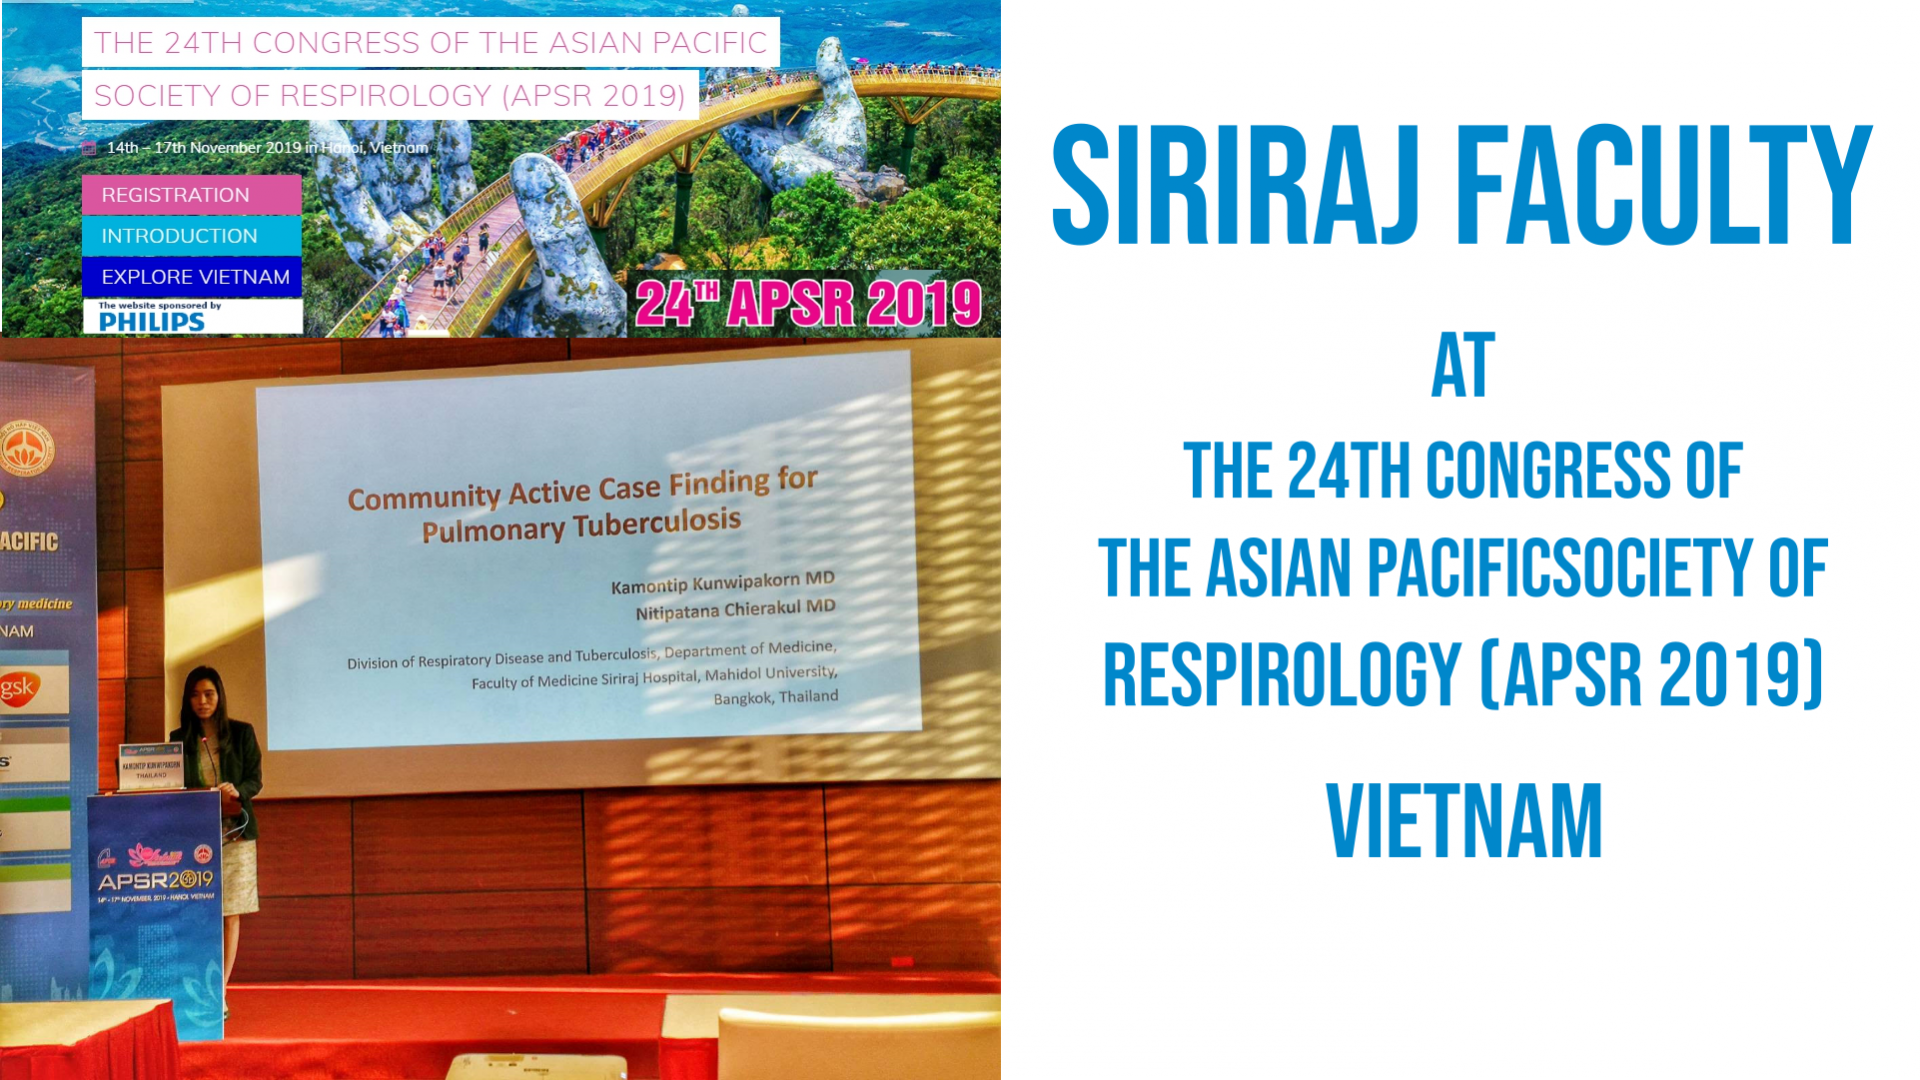 Siriraj Faculty at the 24th Congress of Asian Pacific Society of Respiratory in Vietnam